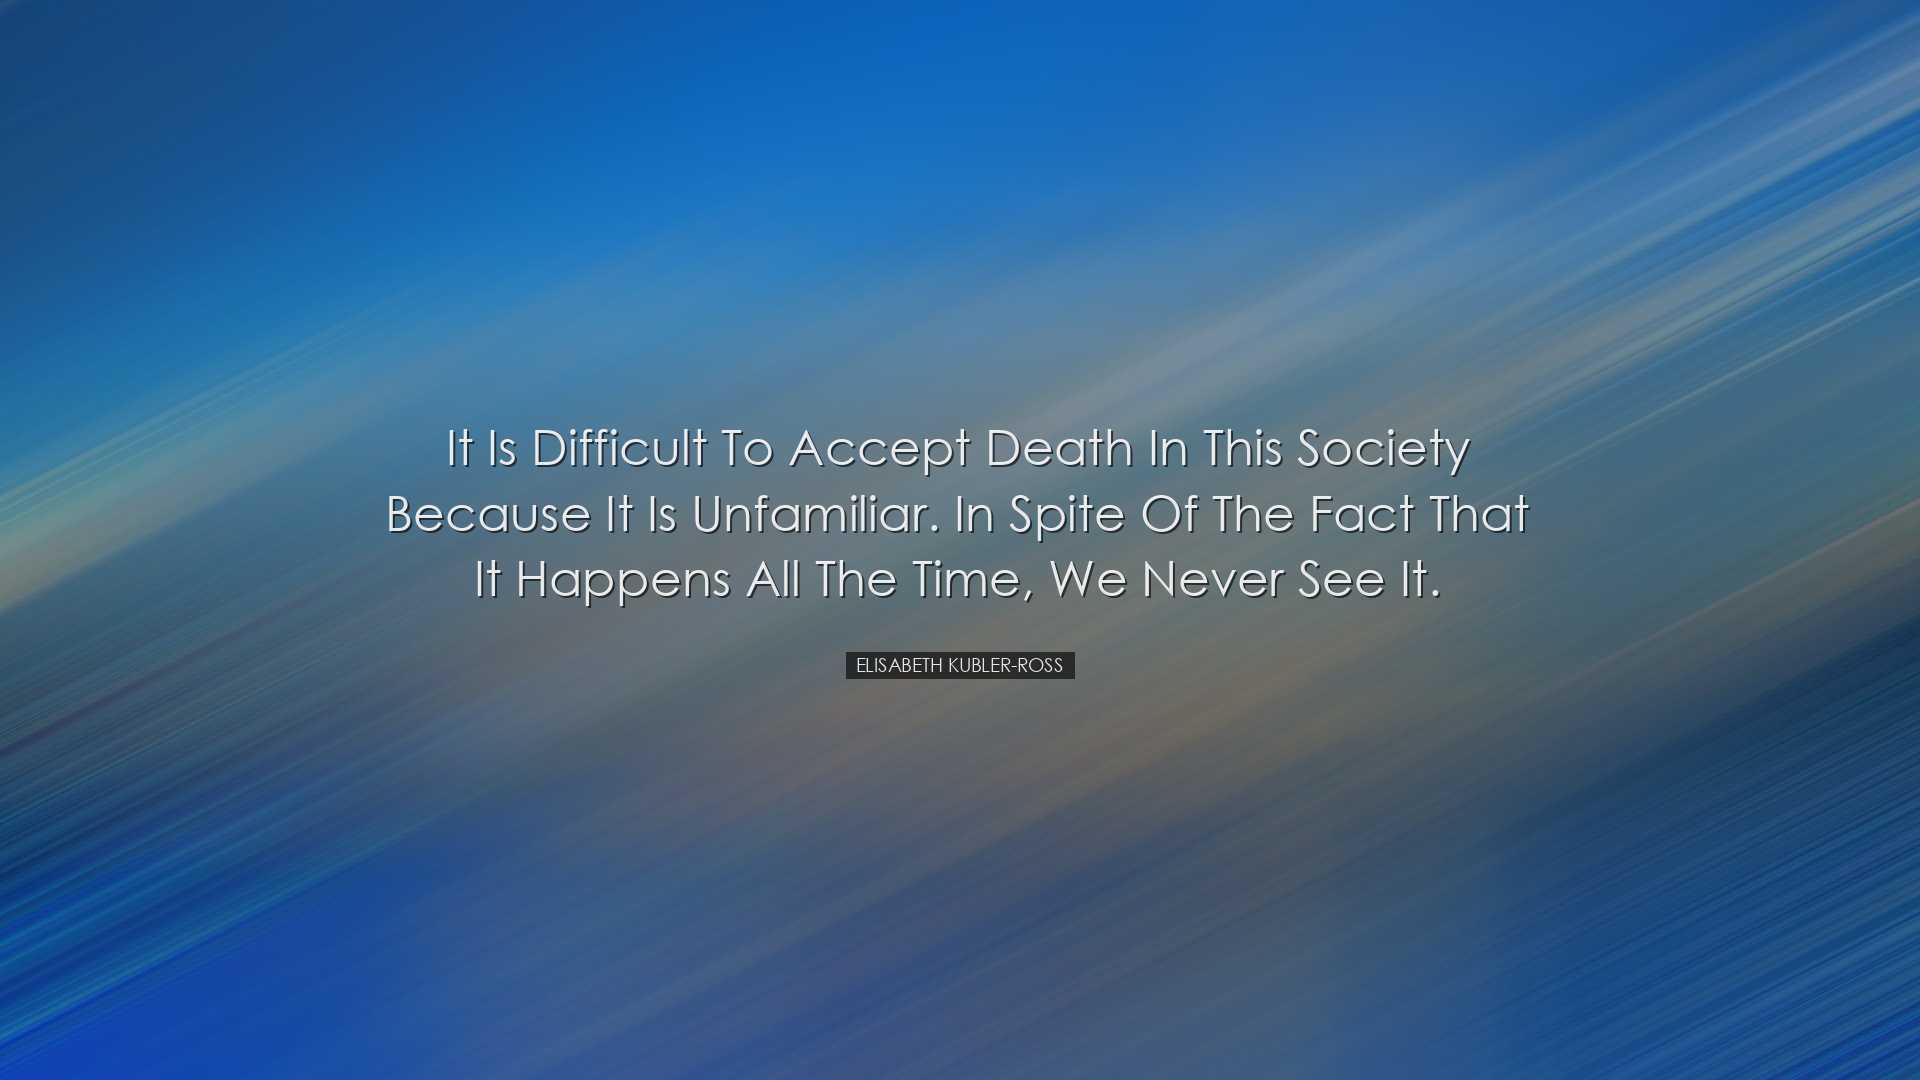 It is difficult to accept death in this society because it is unfa